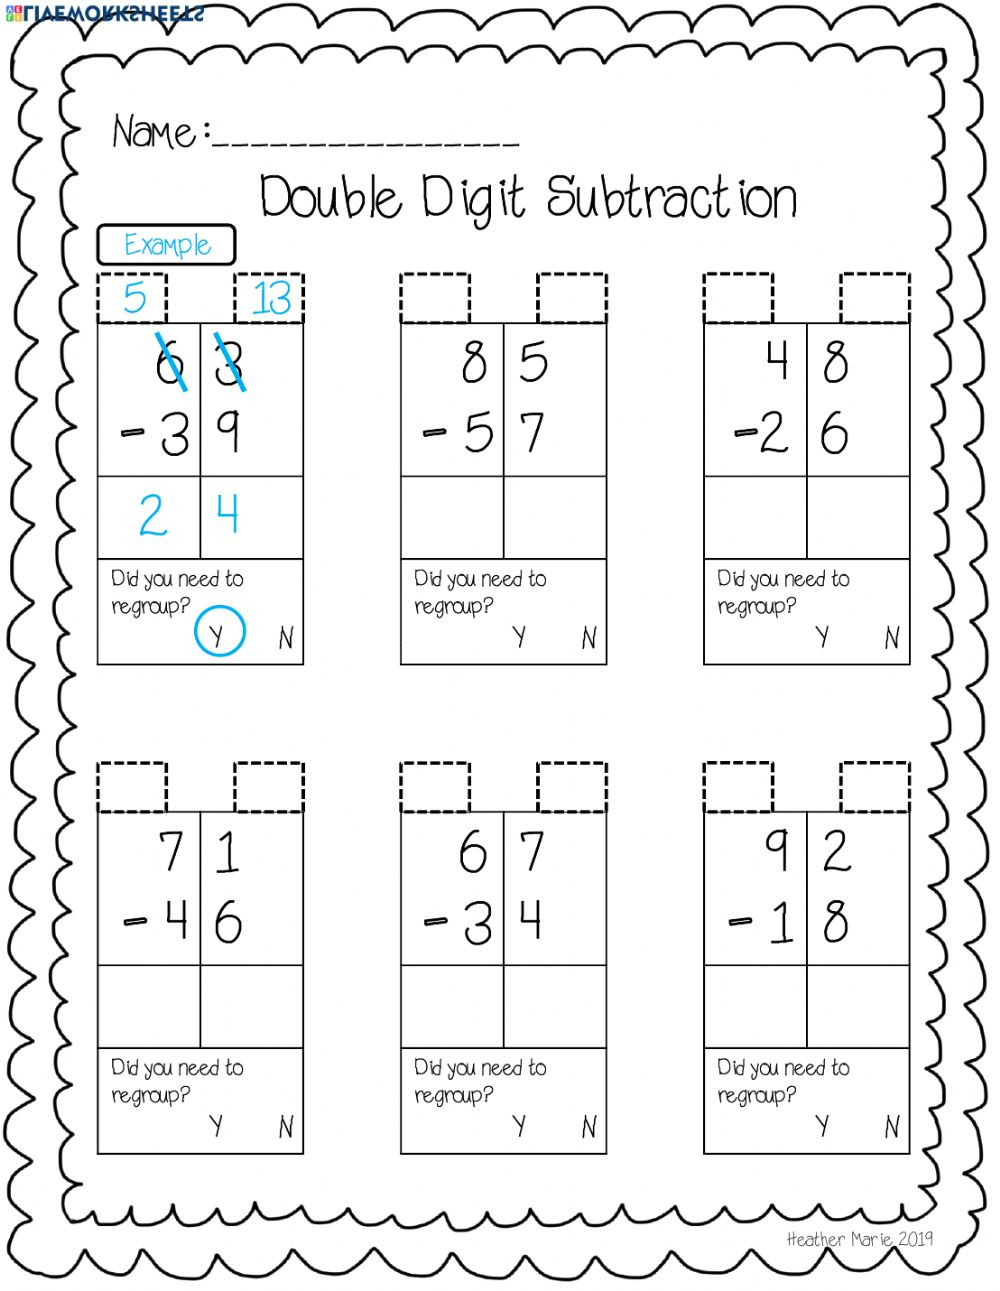 Subtracting With Regrouping Worksheet